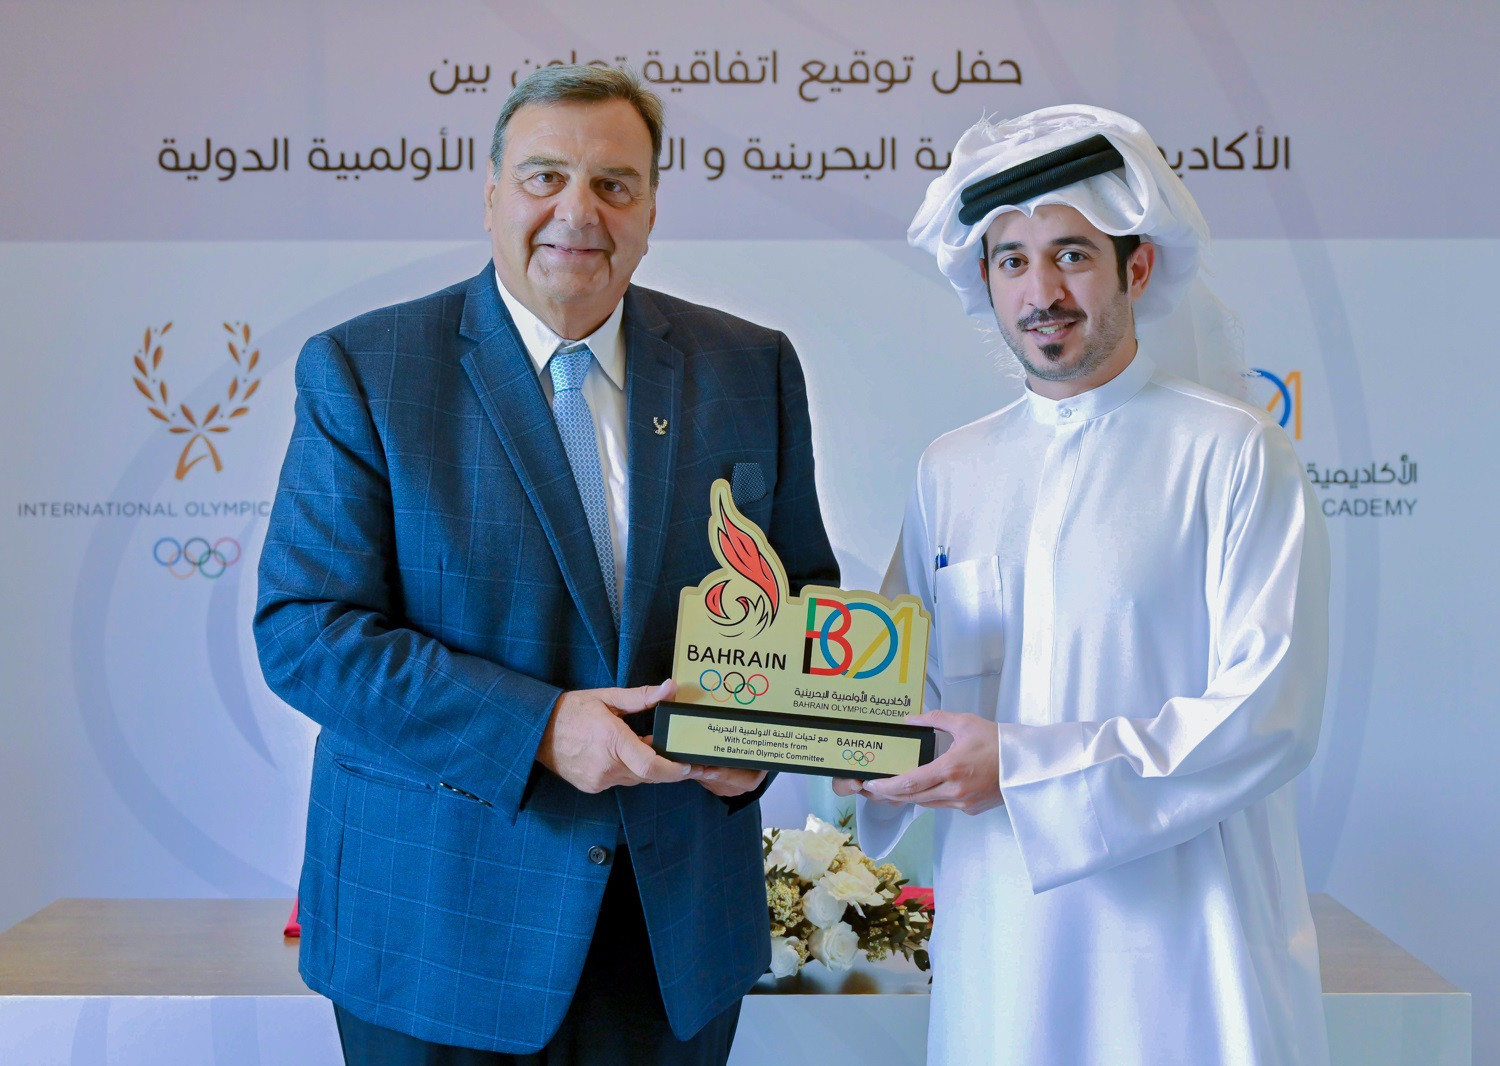 Bahrain NOC signs cooperation agreement with International Olympic Academy